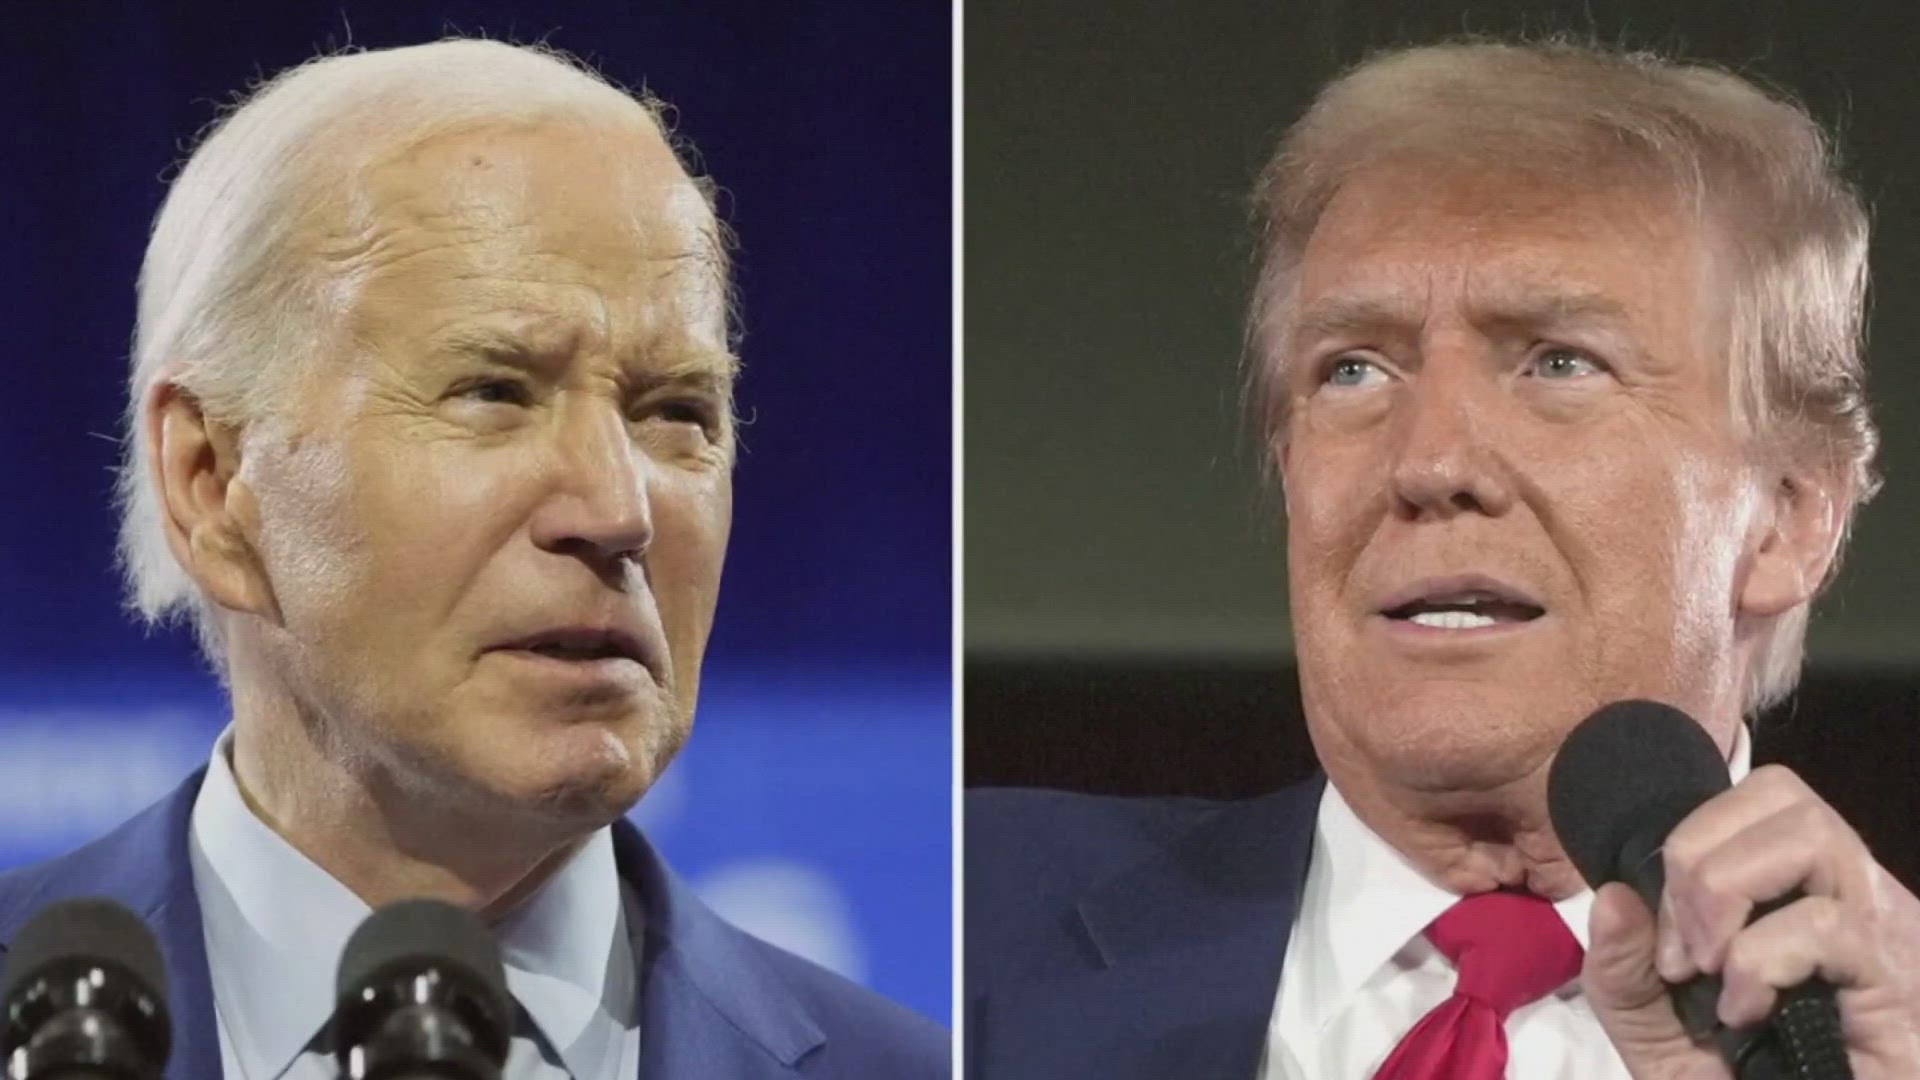 Biden and Trump spent the weekend campaigning after agreeing to two presidential debates, one in June and one in September.